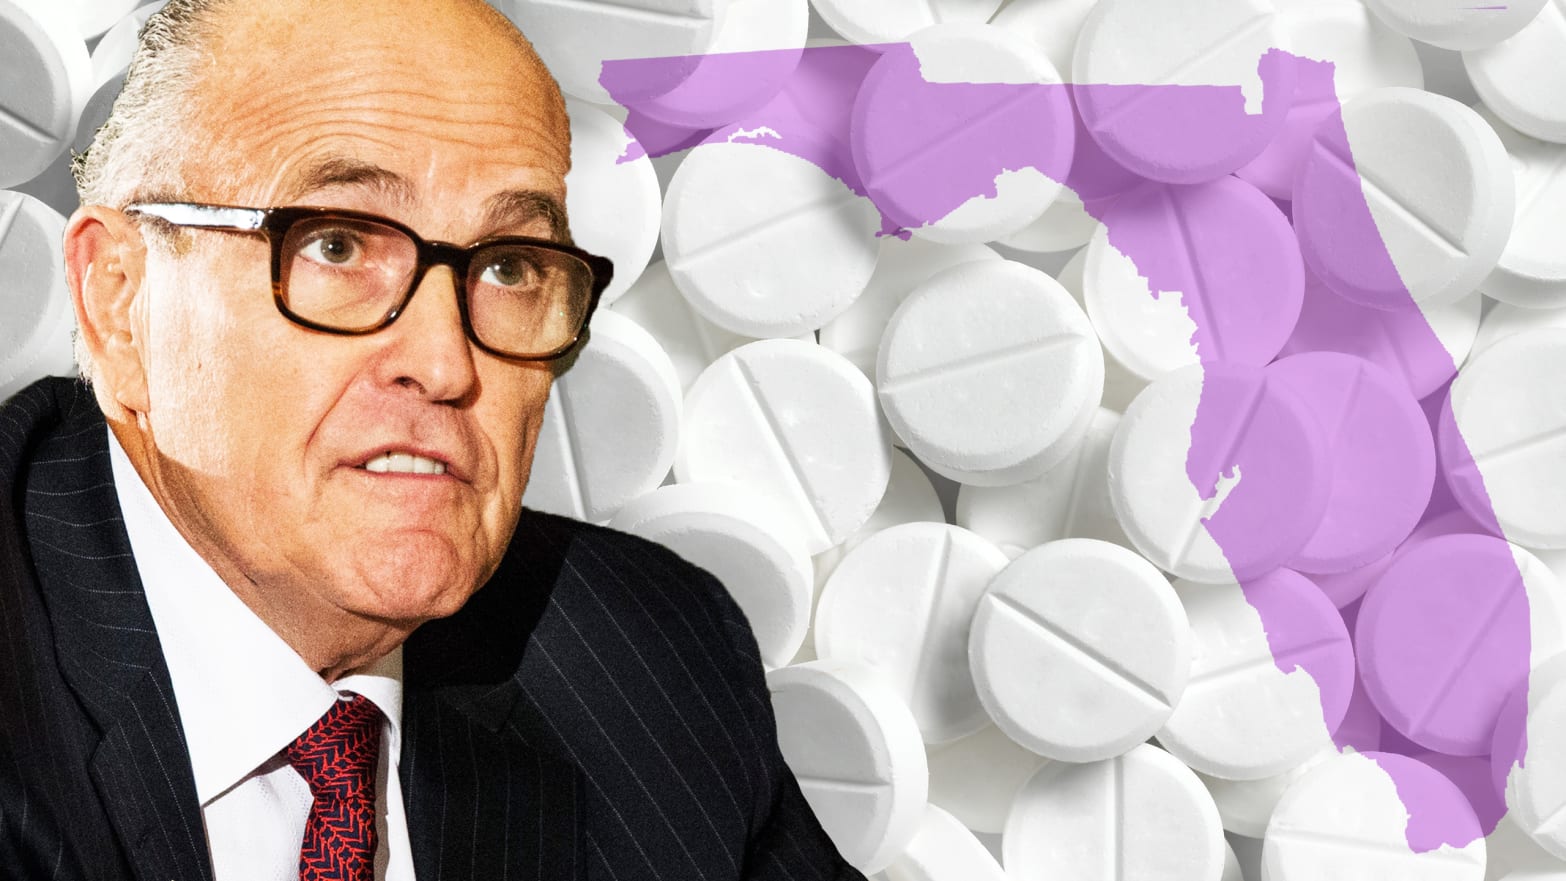 rudy giuliani portrait looking nervous in front of opioid pills behind him and lilac purple florida state map superimposed behind oxycontin purdue pharmaceutical epidemic